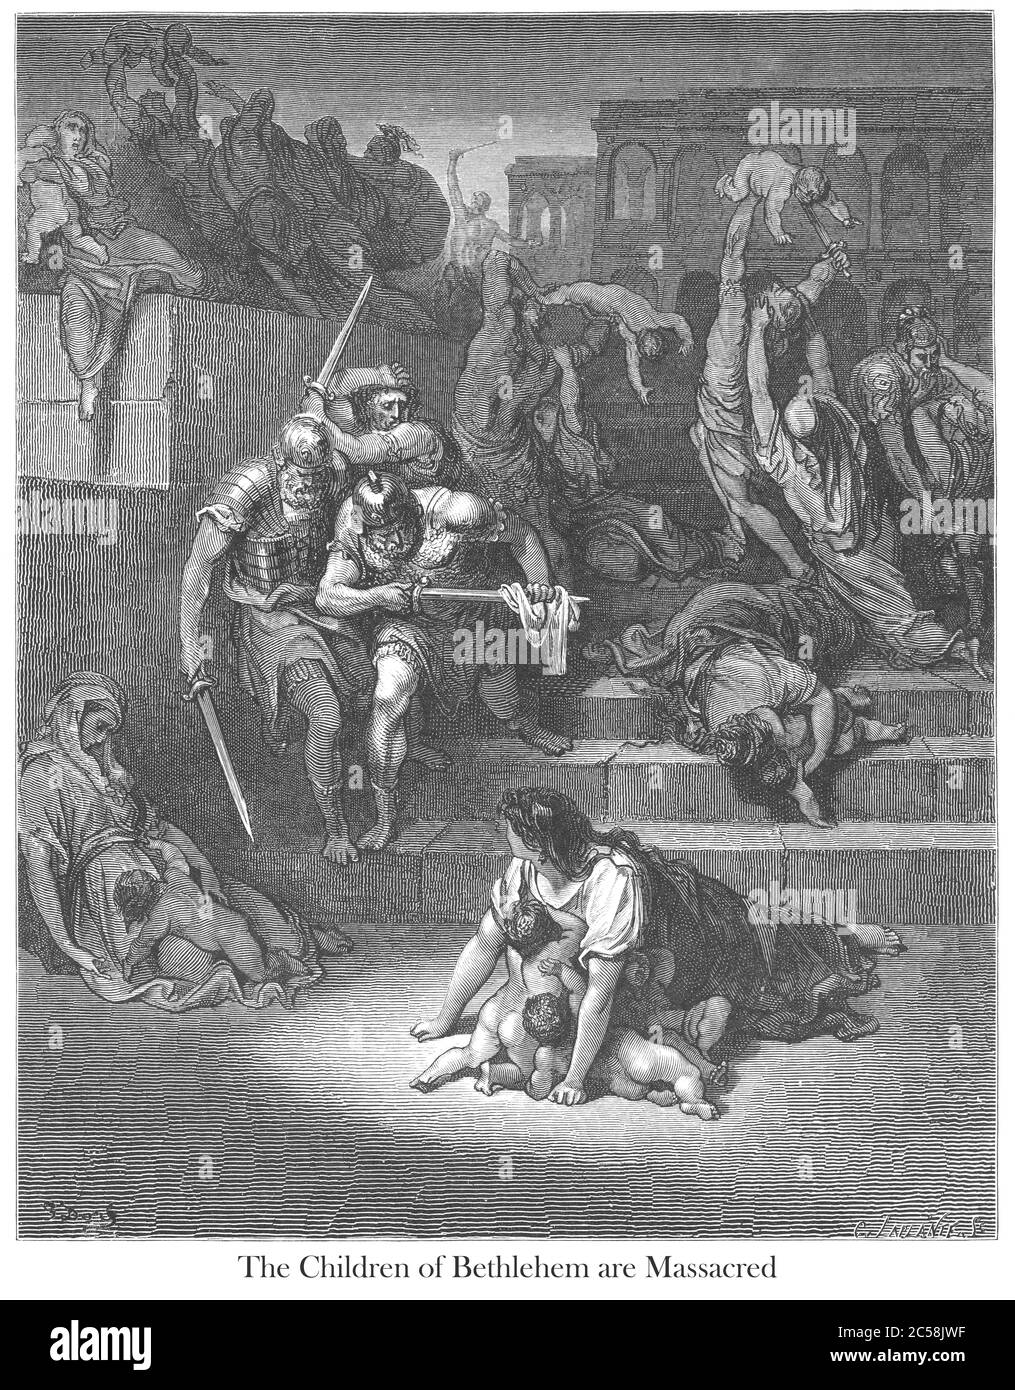 The Massacre of the Innocents or The Children of Bethlehem are Massacred [Matthew 2:16] From the book 'Bible Gallery' Illustrated by Gustave Dore with Memoir of Dore and Descriptive Letter-press by Talbot W. Chambers D.D. Published by Cassell & Company Limited in London and simultaneously by Mame in Tours, France in 1866 Stock Photo